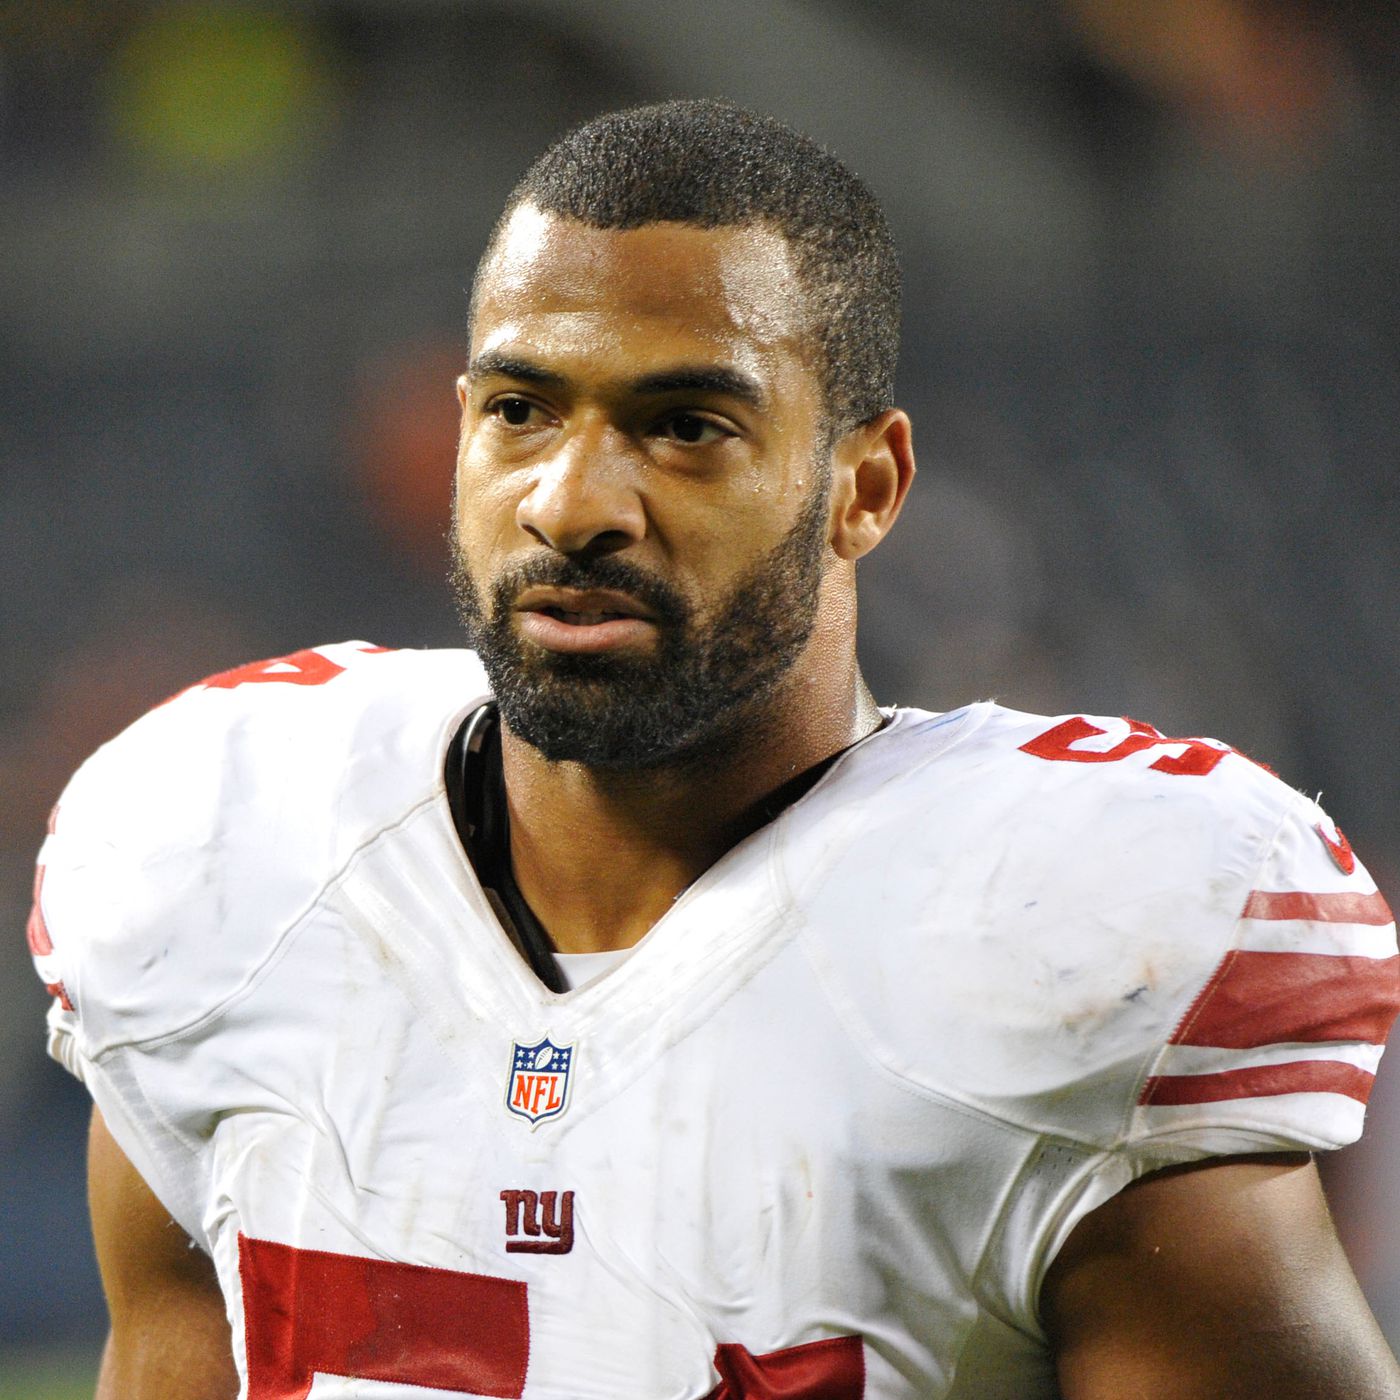 Giants free agency: Ex-Giant LB Spencer Paysinger signs with Miami Dolphins - Big Blue View